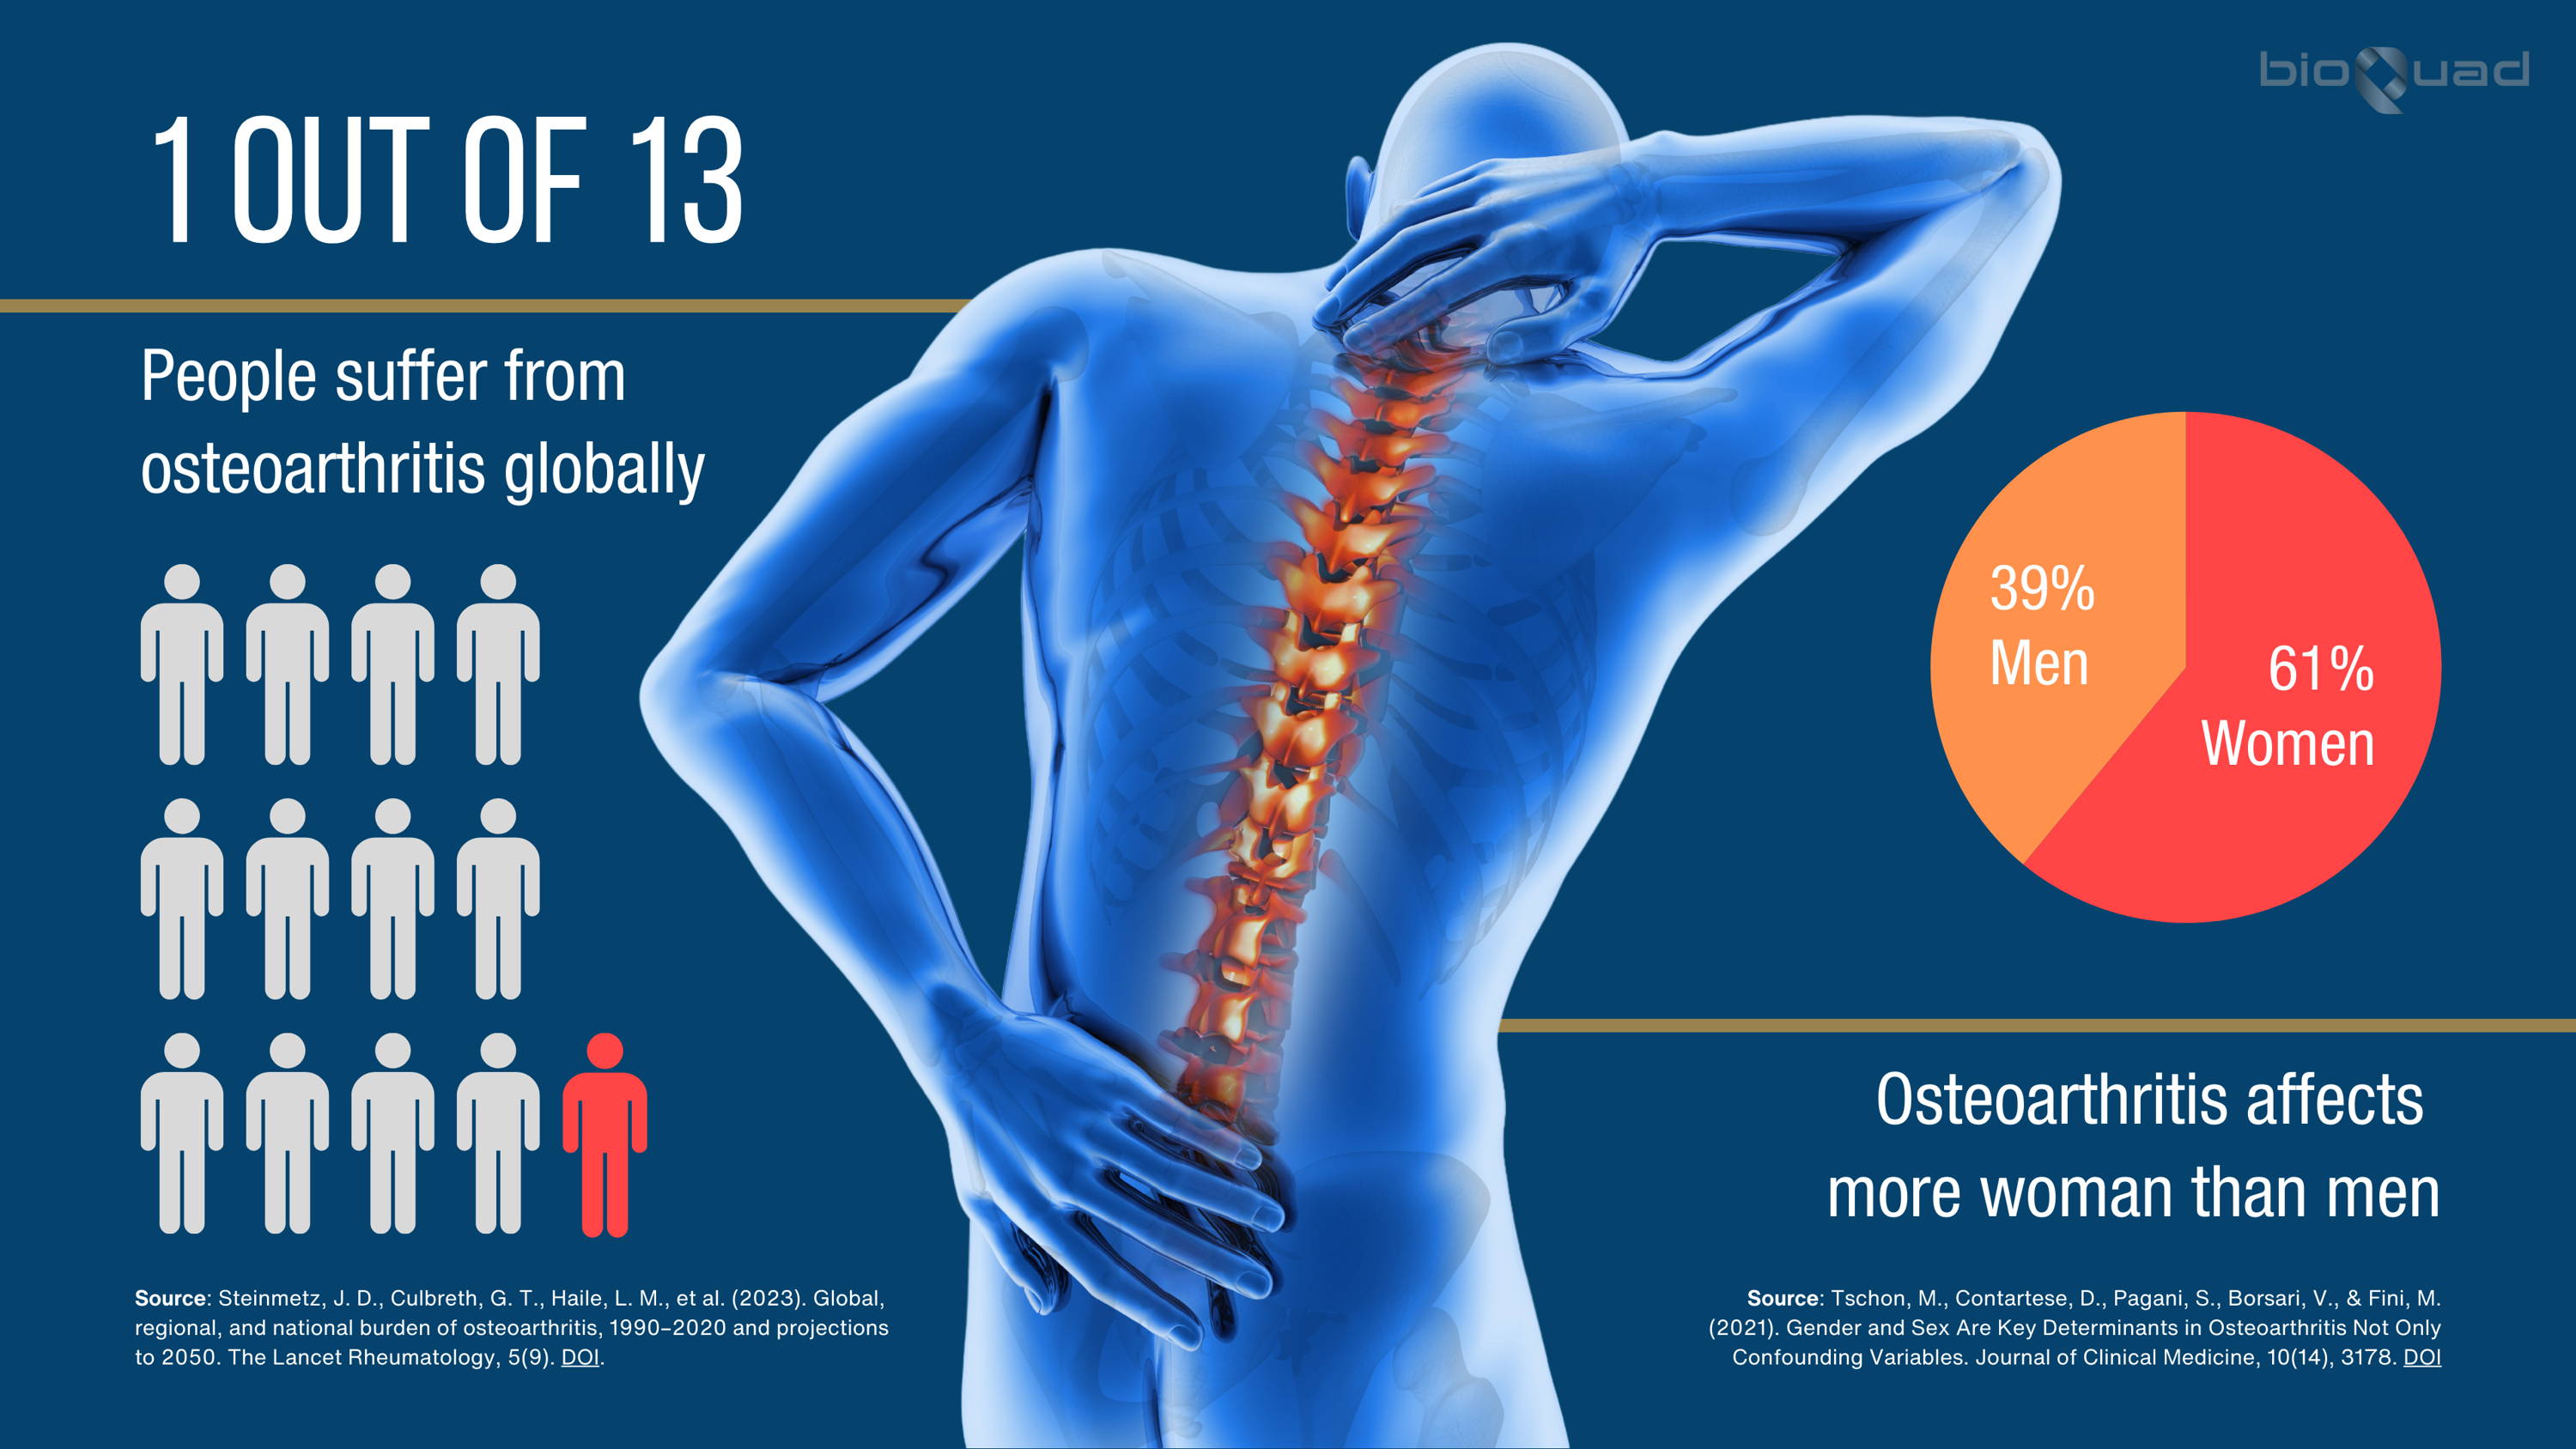 Infographic showing '1 out of 13 people suffer from osteoarthritis globally' with a visual of a human figure highlighting spinal pain, accompanied by a pie chart showing osteoarthritis affects 61% women and 39% men, with sources cited from The Lancet Rheumatology and Journal of Clinical Medicine.